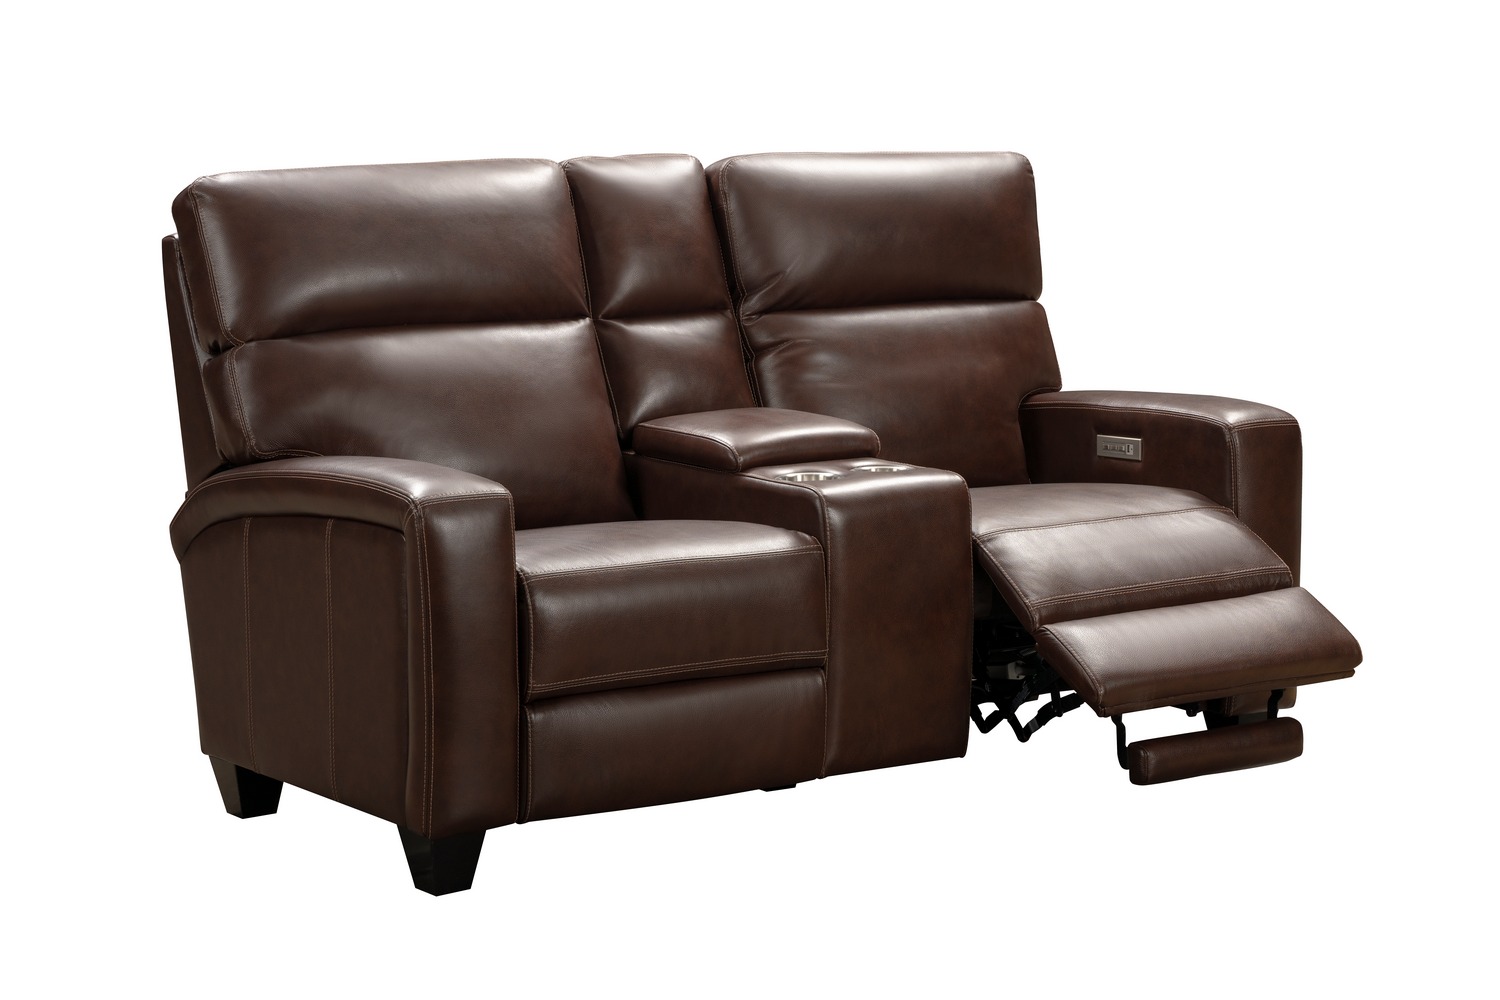 Barcalounger Macello Power Reclining Console Loveseat with Power Head Rests and Power Lumbar - Castleton Rustic Brown/Leather Match